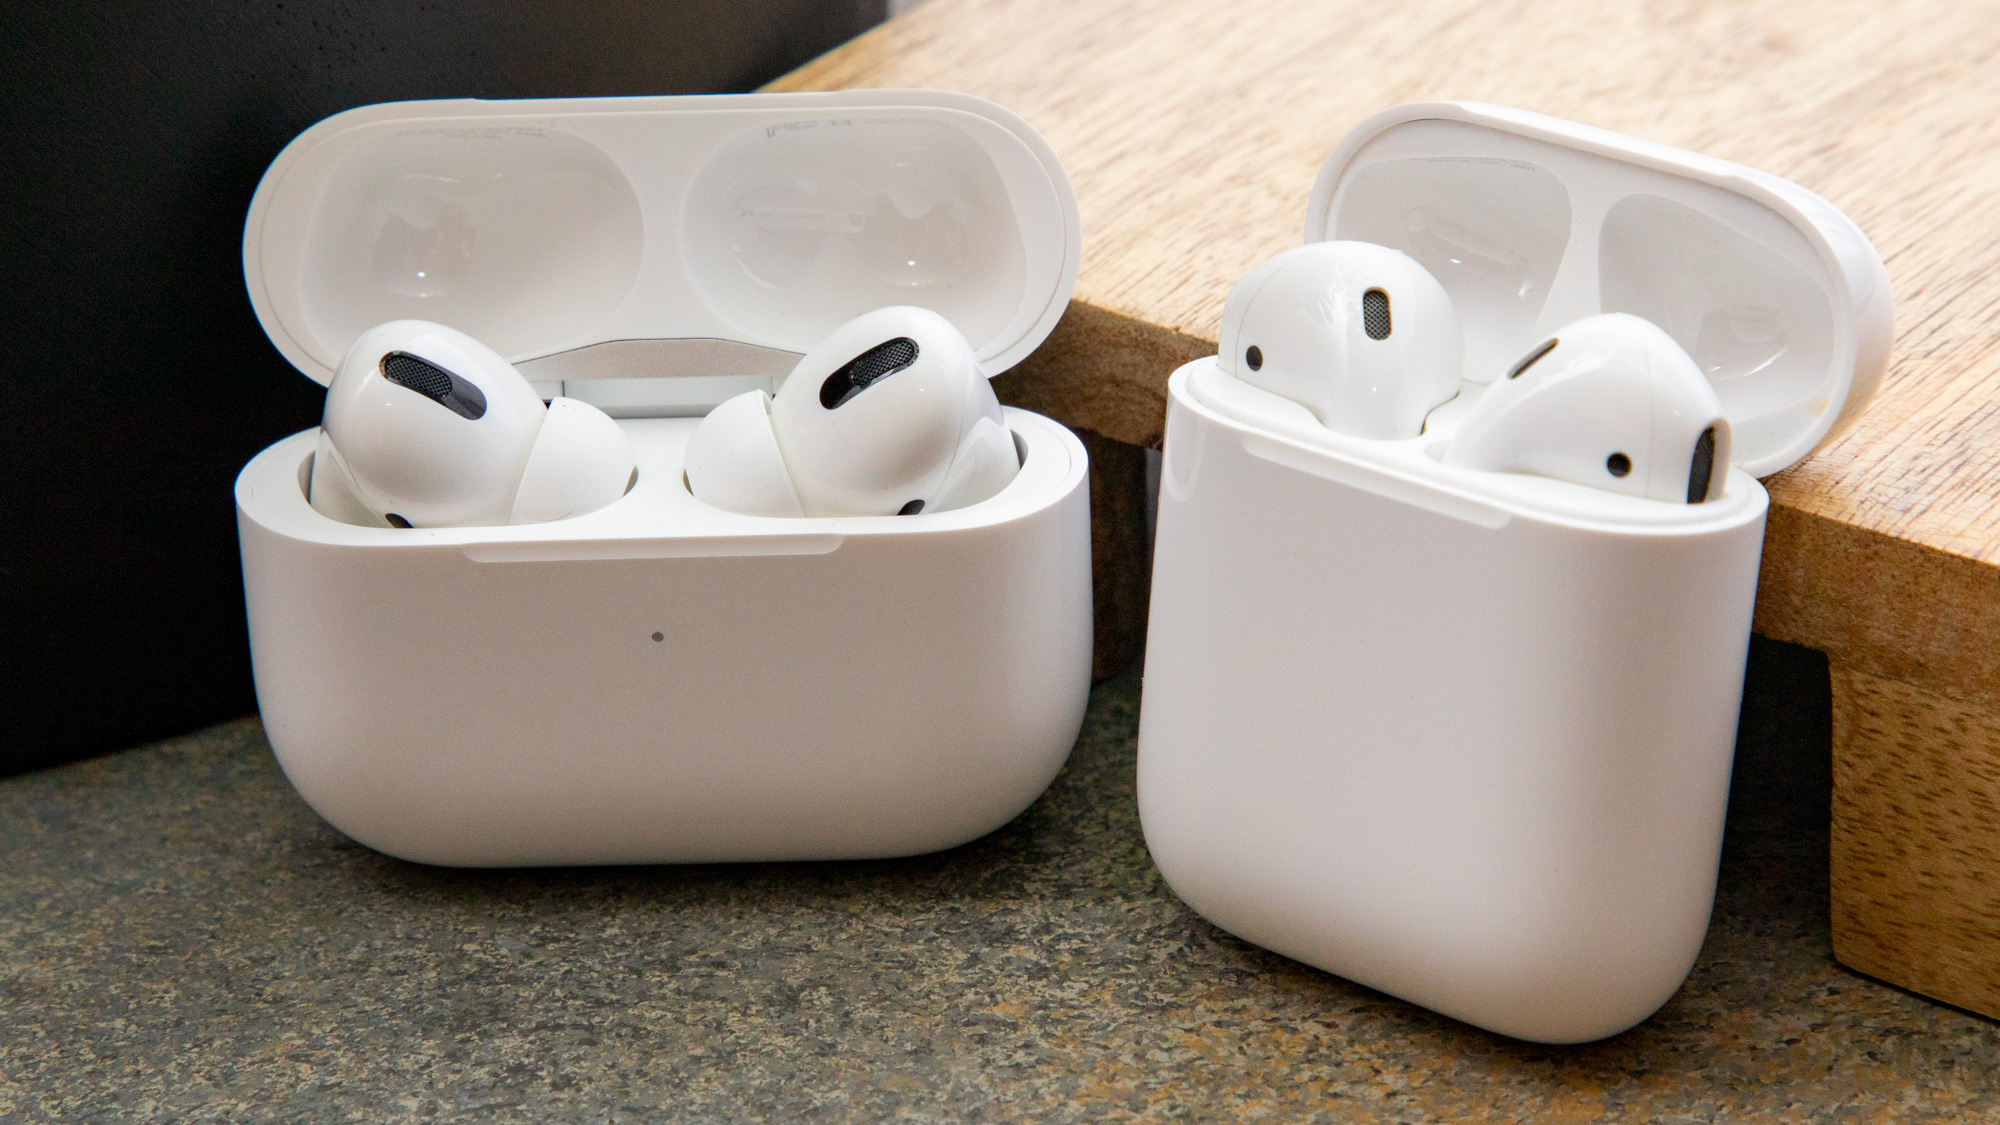 Apple AirPods vs AirPods Pro: which buds are best? - TechBuzzProTechBuzzPro